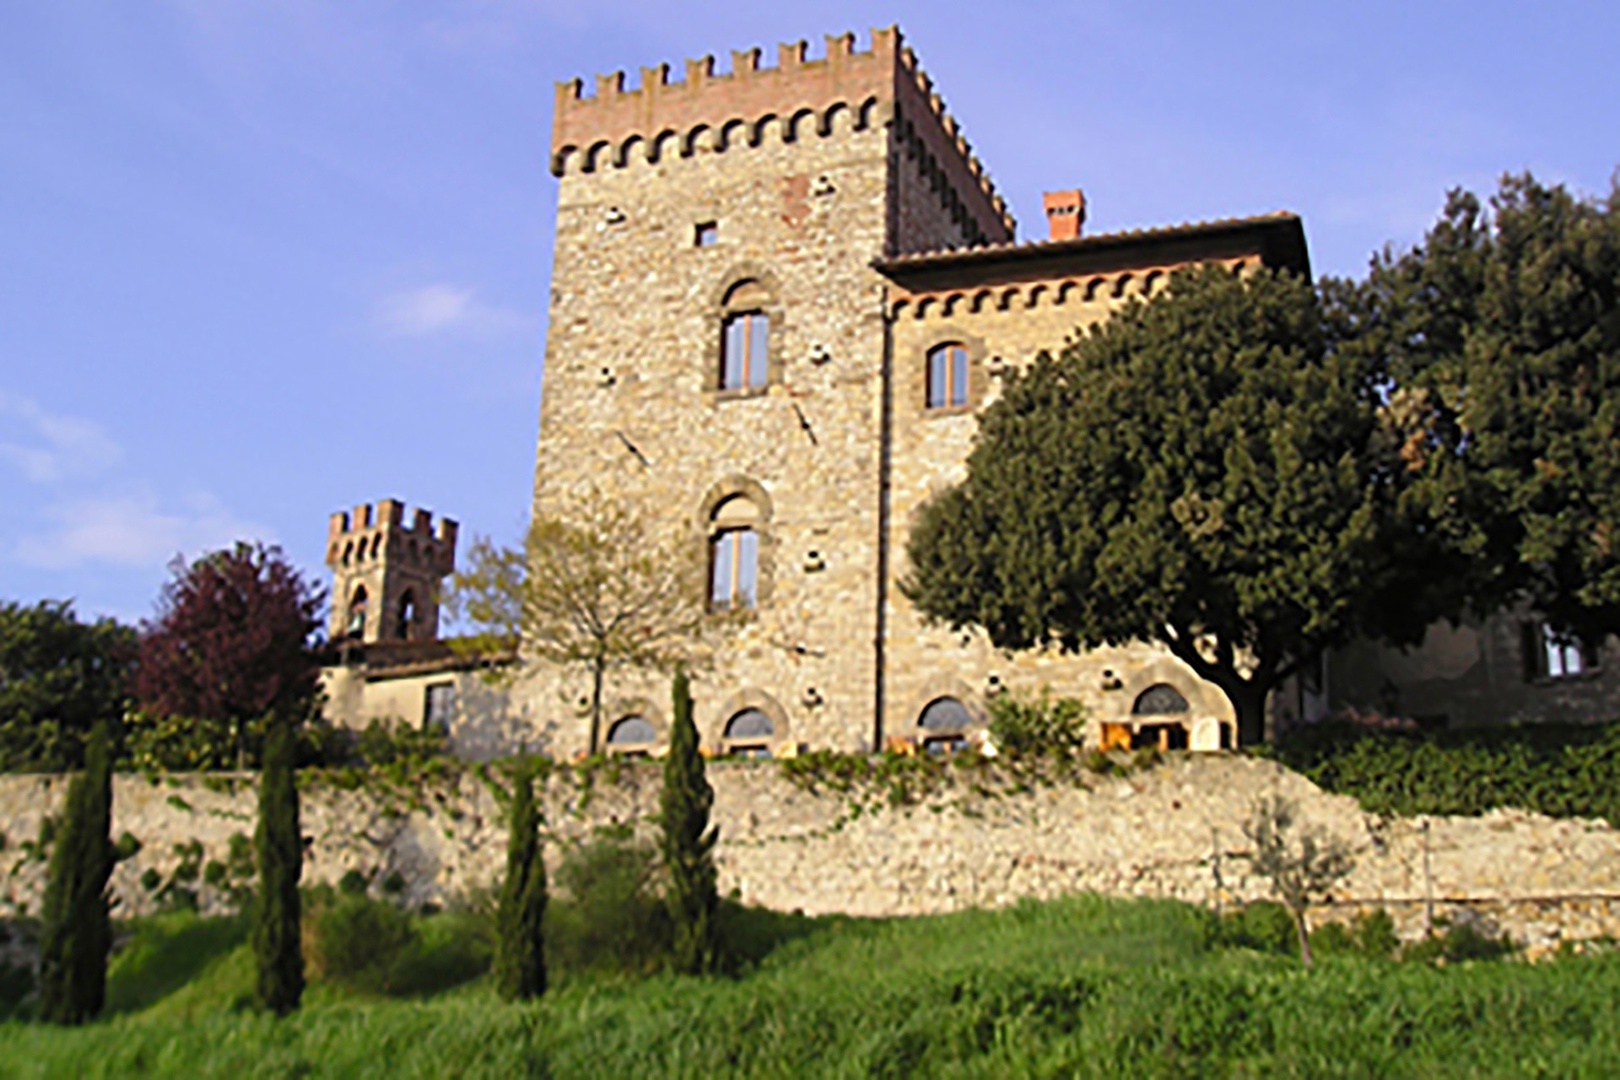 Volognano Castle has tours and wine tastings.